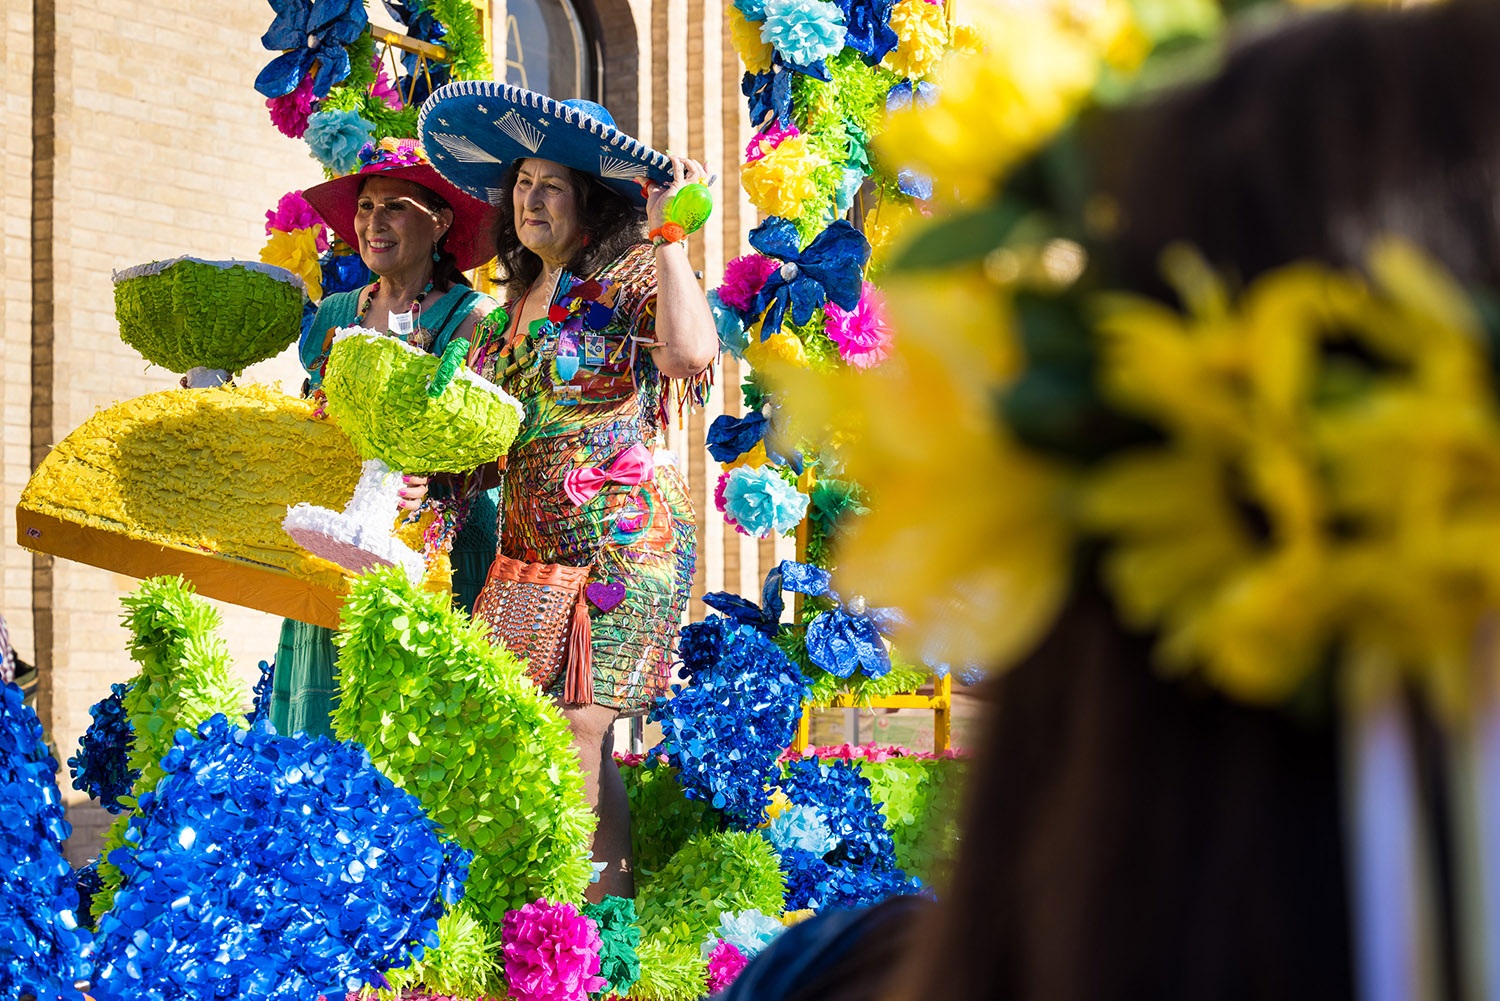 Cindy Ortega and Deborah Travieso take a photo-op with Fiesta props during Fiesta Fiesta at Hemisfair, San Antonio, TX, on Thursday, March 31, 2022. Photo by Chris Stokes | Heron contributor